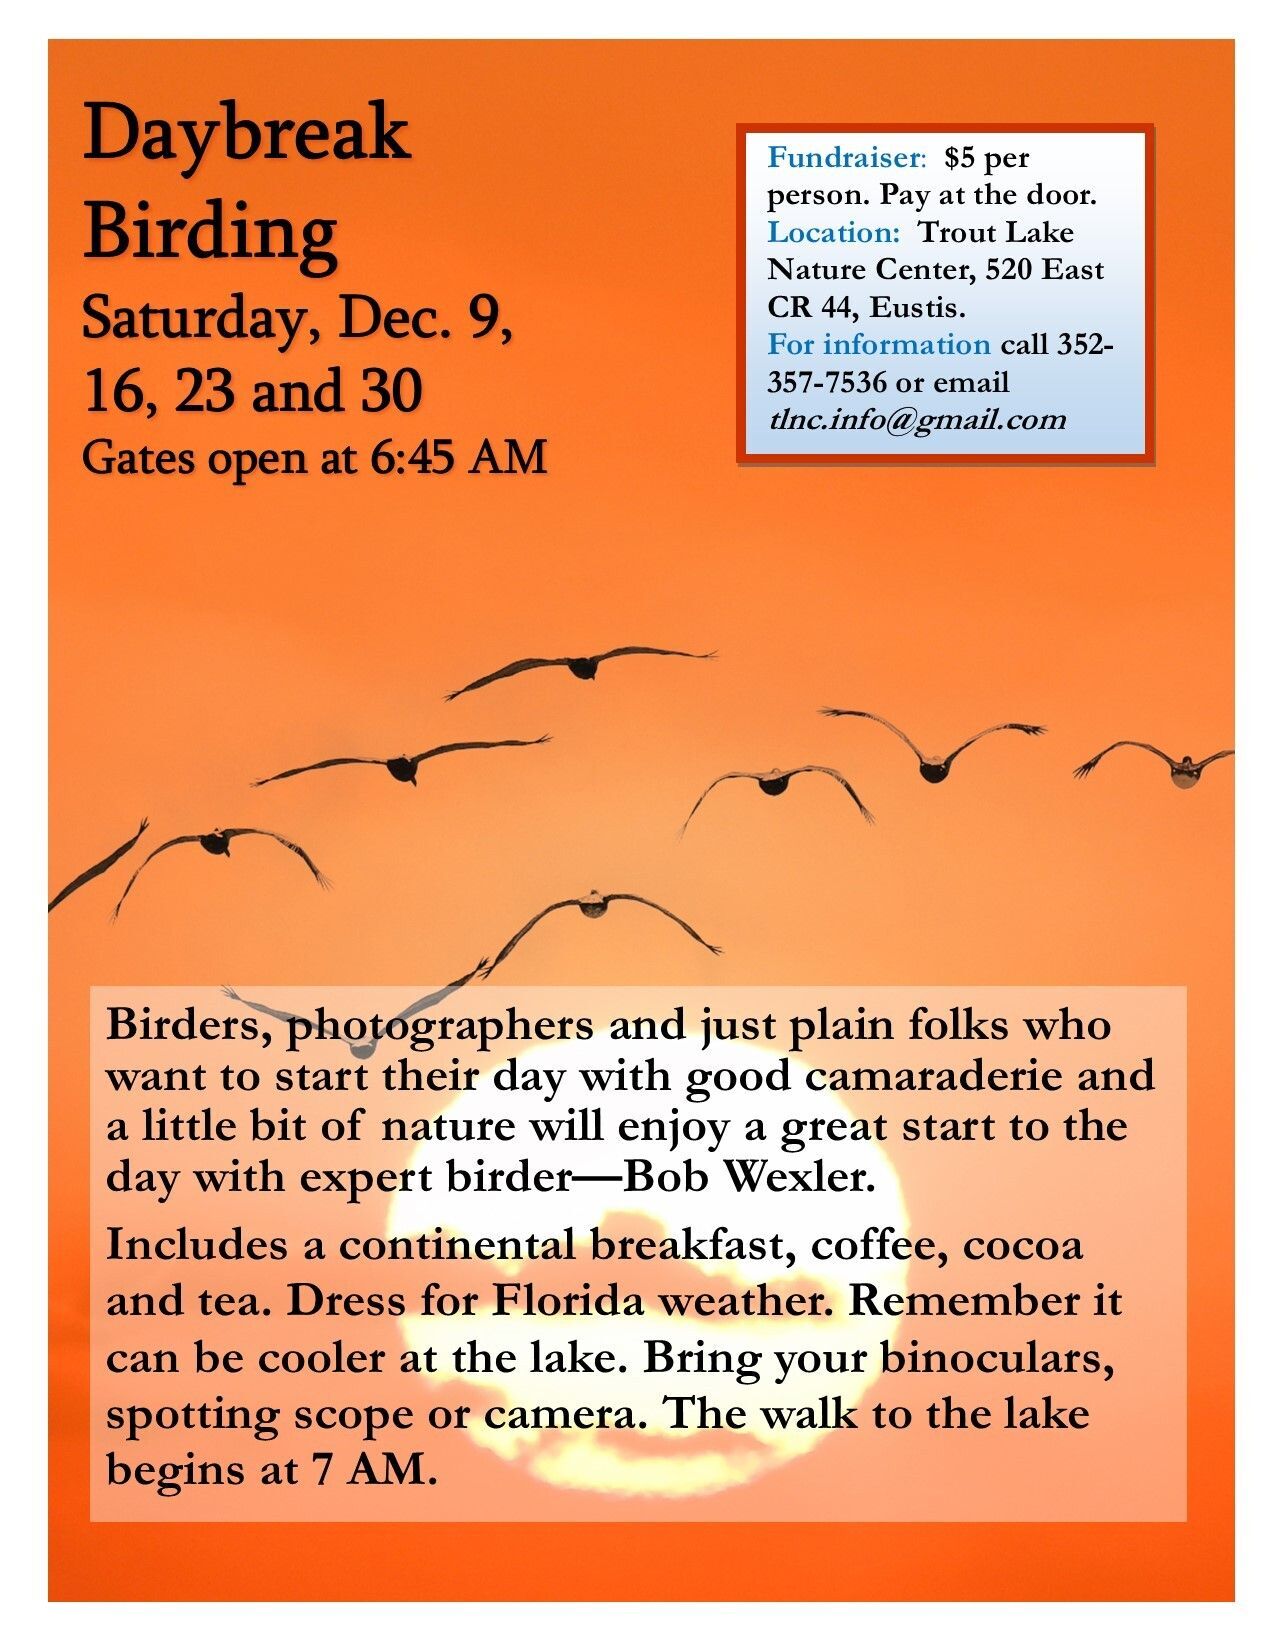 Behind the text about the event is a graphic of birds silhouetted flying into the sunrise. 